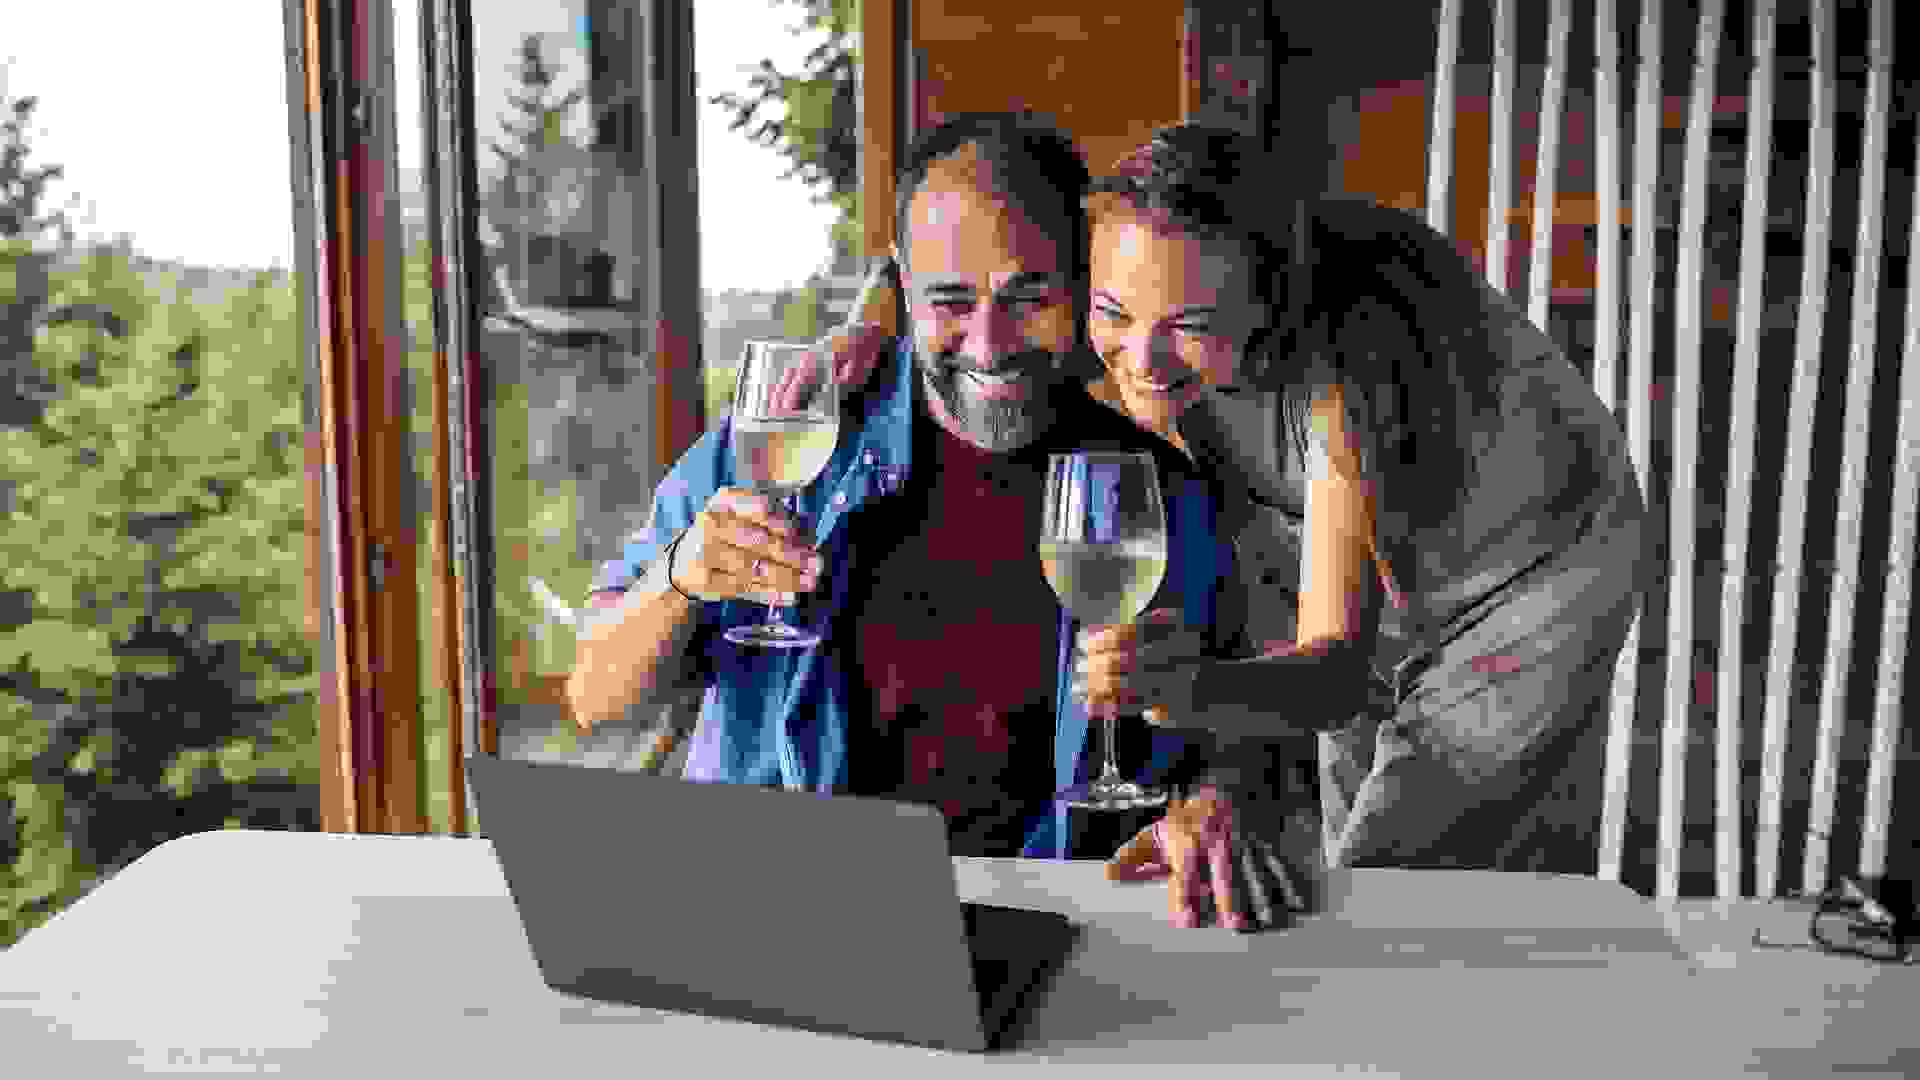 Couple having a video call on their laptop stock photo